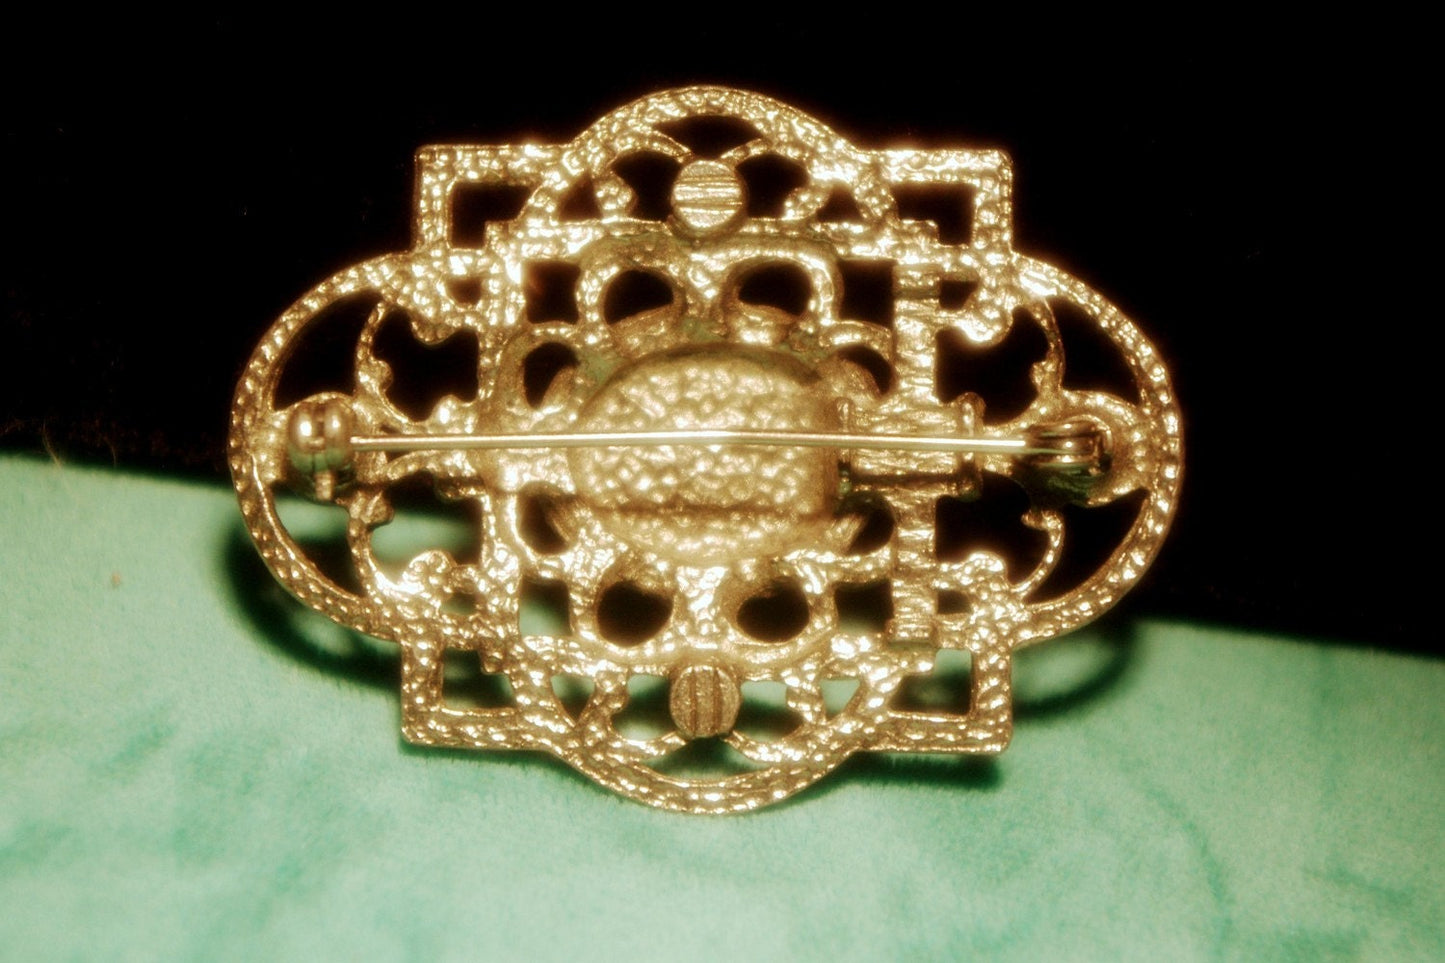 Vintage Silver Filigree Brooch with Pearl Cabochon Stone